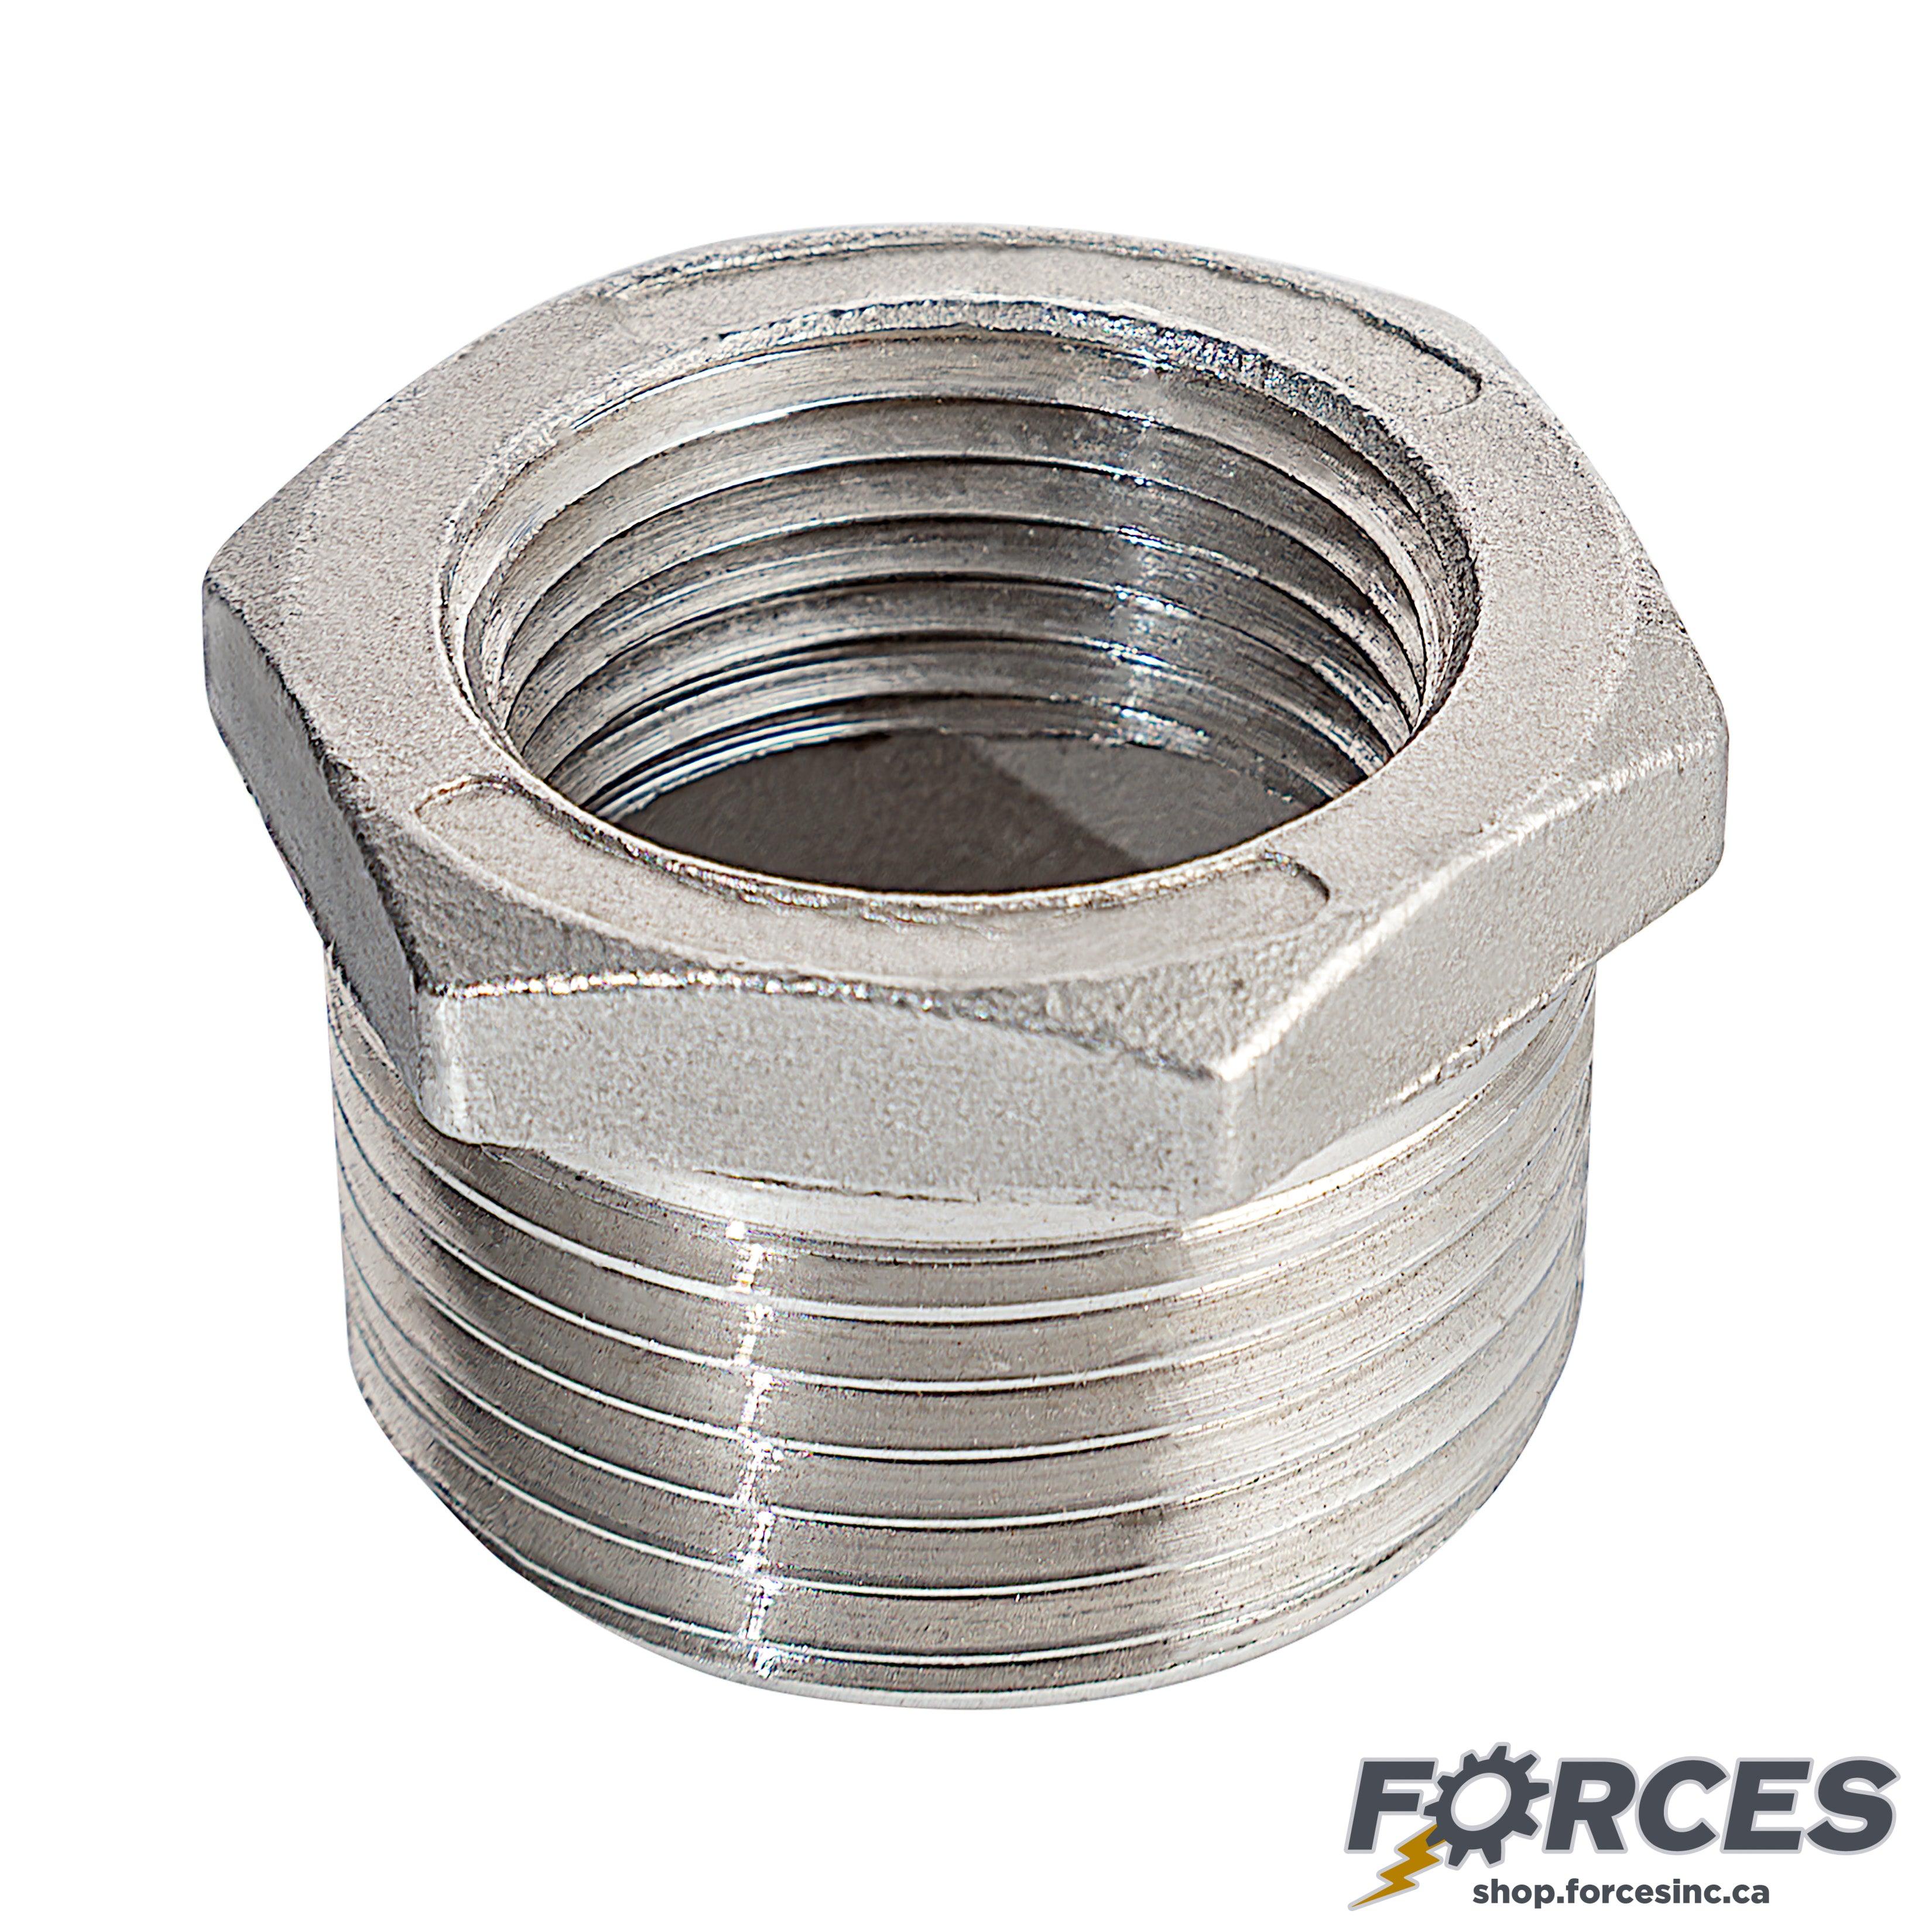 2" (M) x 1-1/2" (F) Reducing Hex Bushing NPT #150 - Stainless Steel 316 - Forces Inc